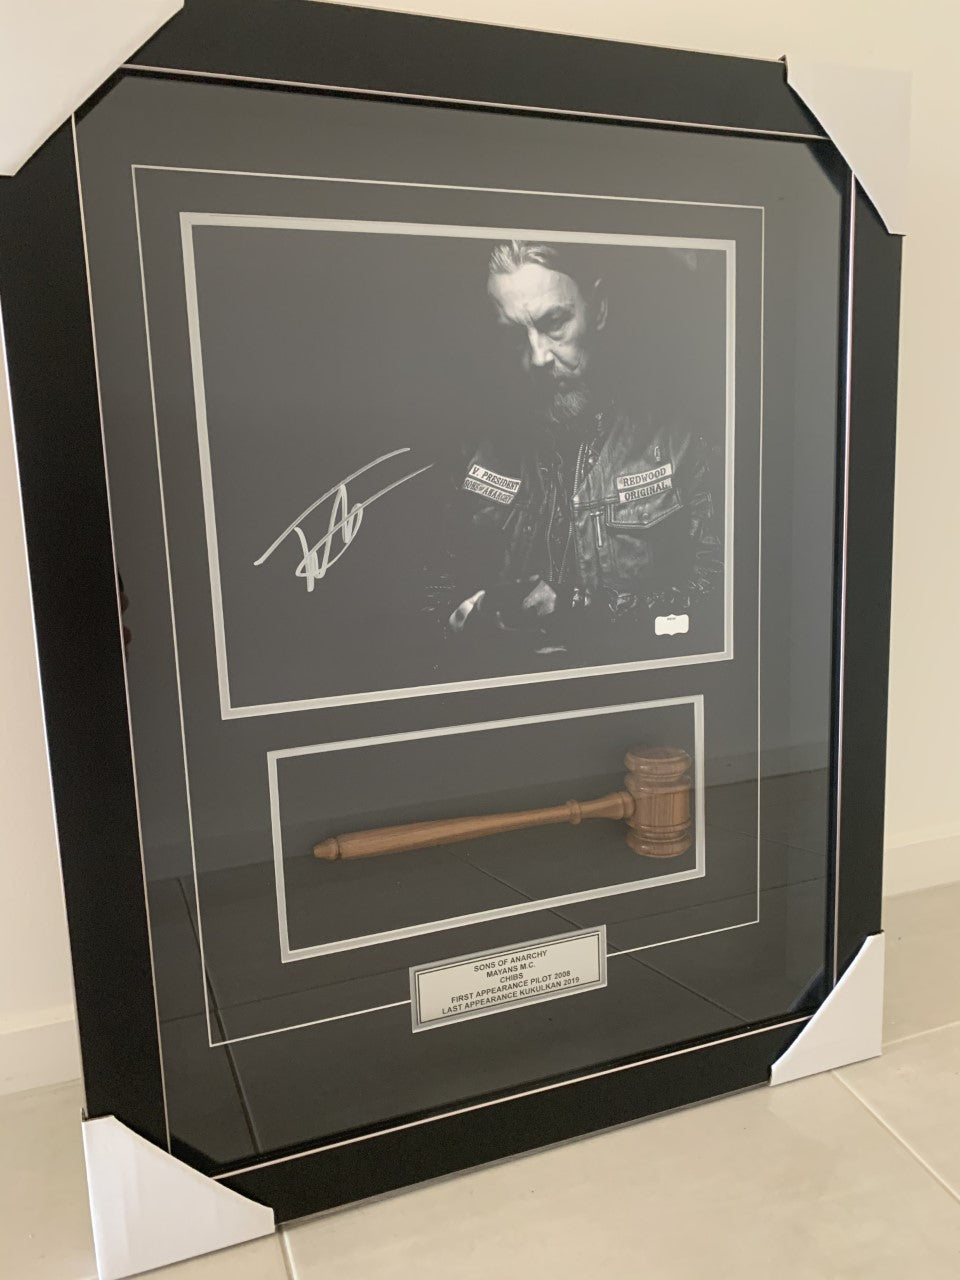 Sons of Anarchy Boxed Frame Hand signed photo by Tommy Flanagan “CHIBS” with Gavel with COA